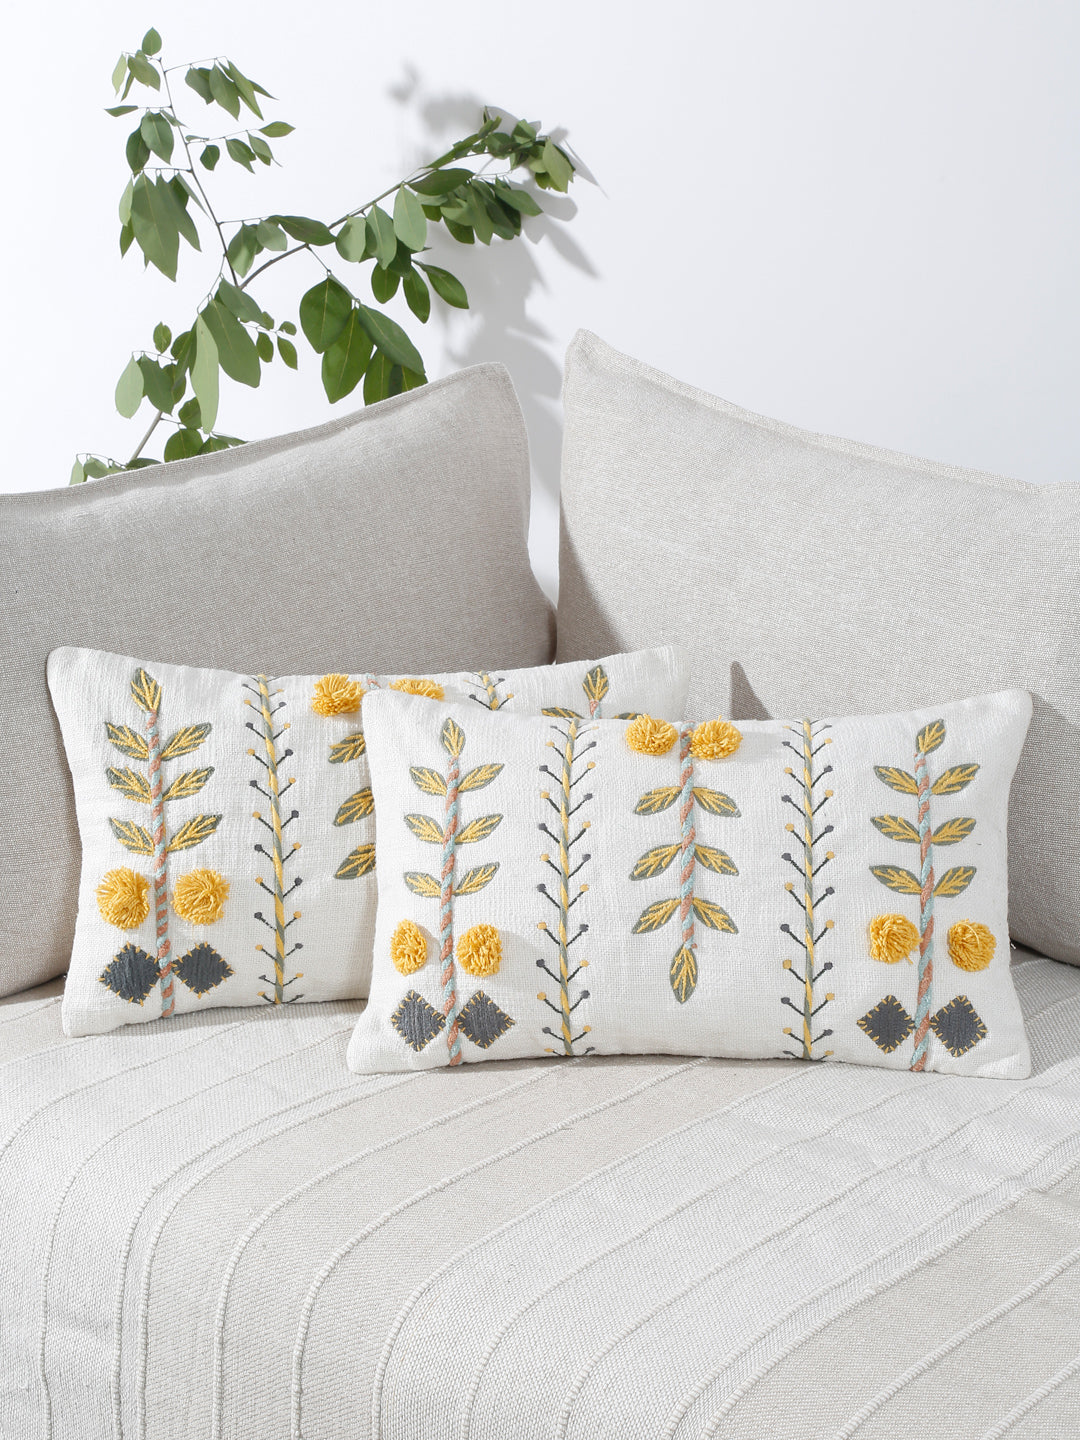 Set of 2 White & Yellow Cotton Embroidered Square Cushion Covers